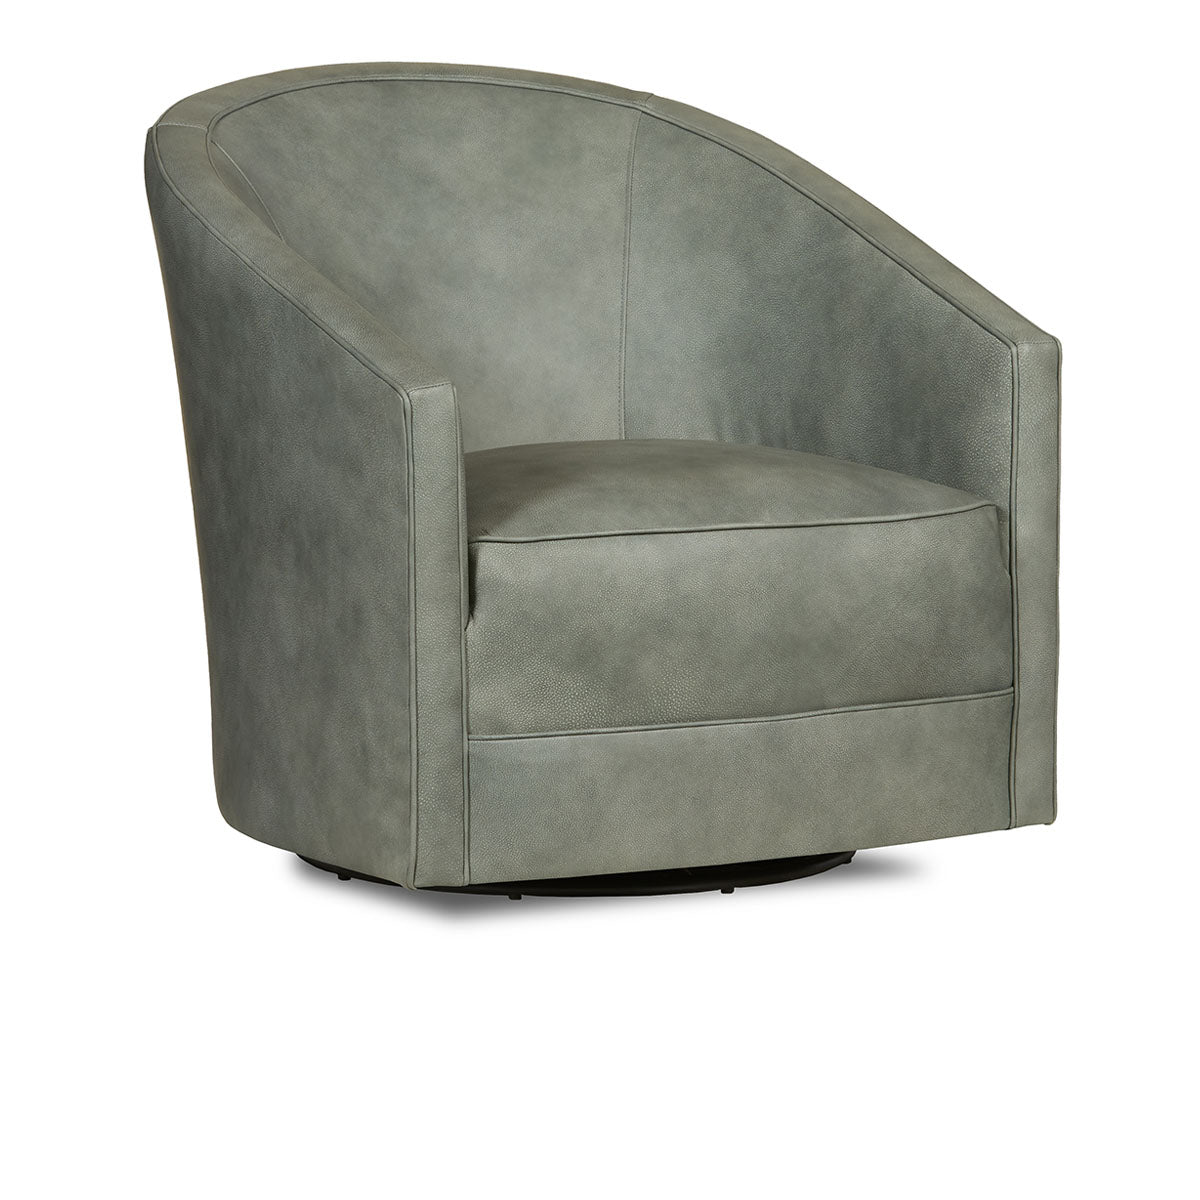 Aguilar Accent Chair - Swivel Landscape Leather, Frozen Valley/Coin - Rug & Home